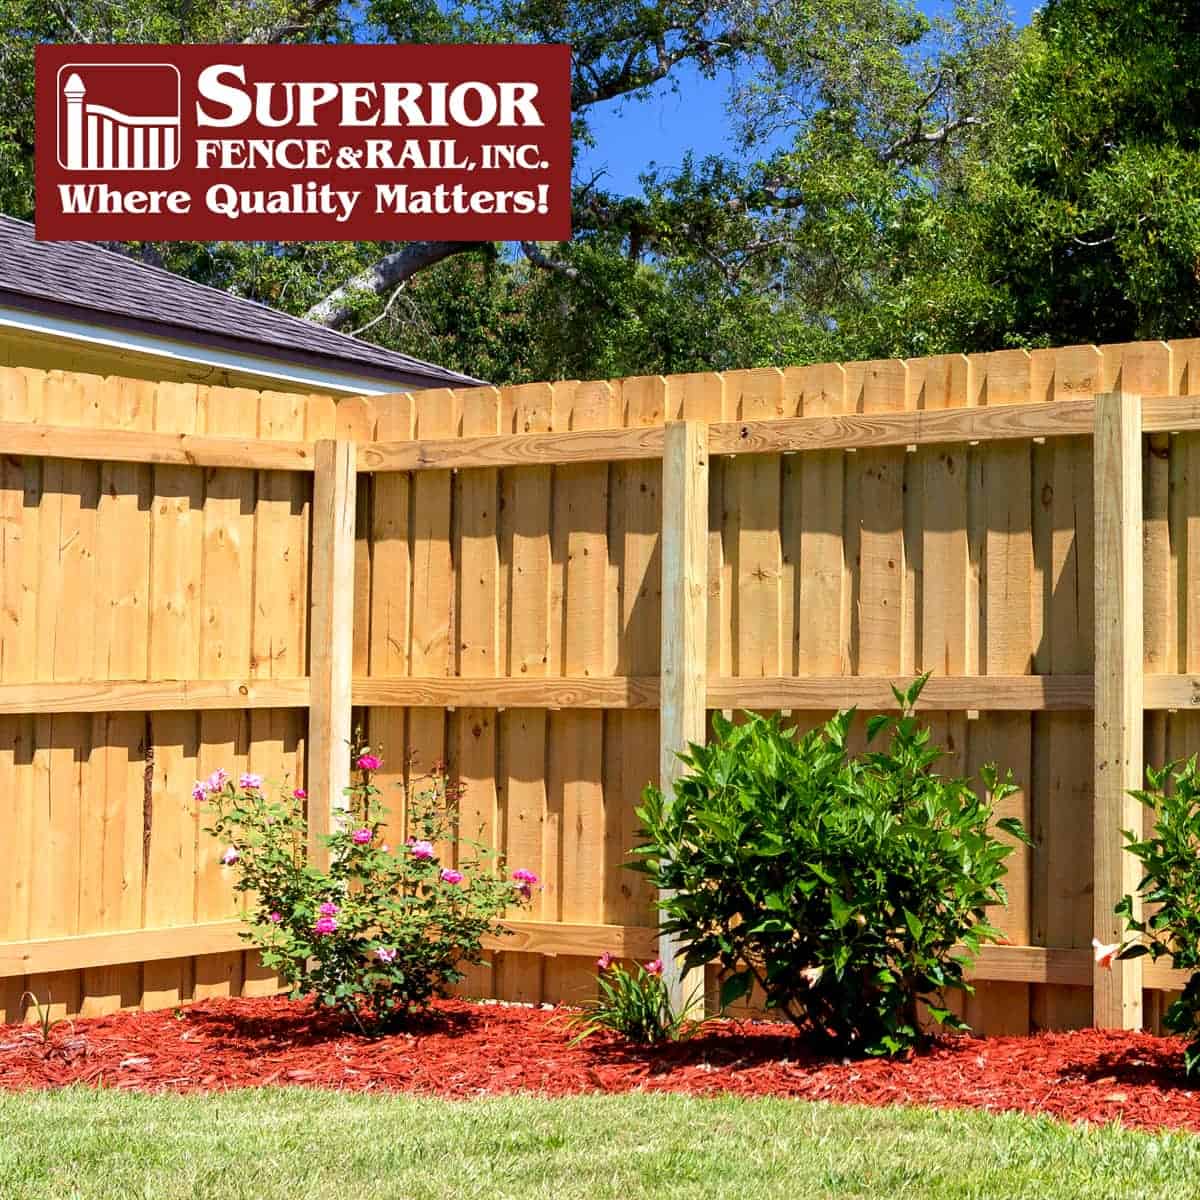 Dale City fence company contractor